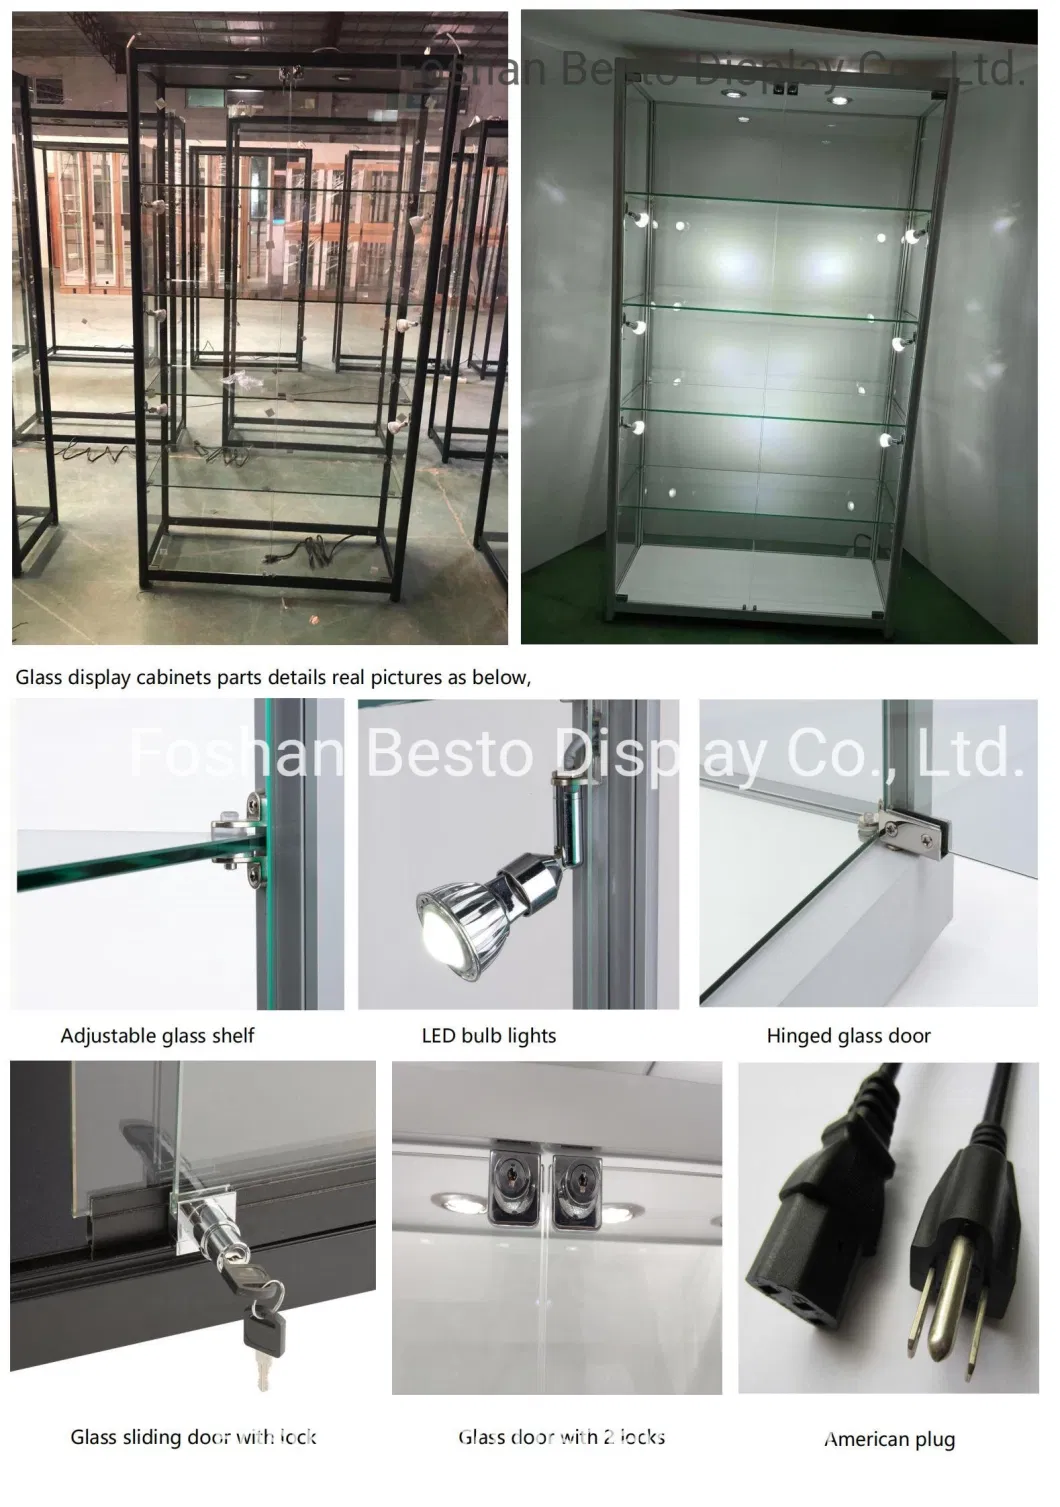 78 Inch Height Glass Display Cabinets with LED Lights and Glass Shelves for Vape Display, Smoke Shop, Jewelry Store, Tabacco, Cigeratte Store, Retail Display.